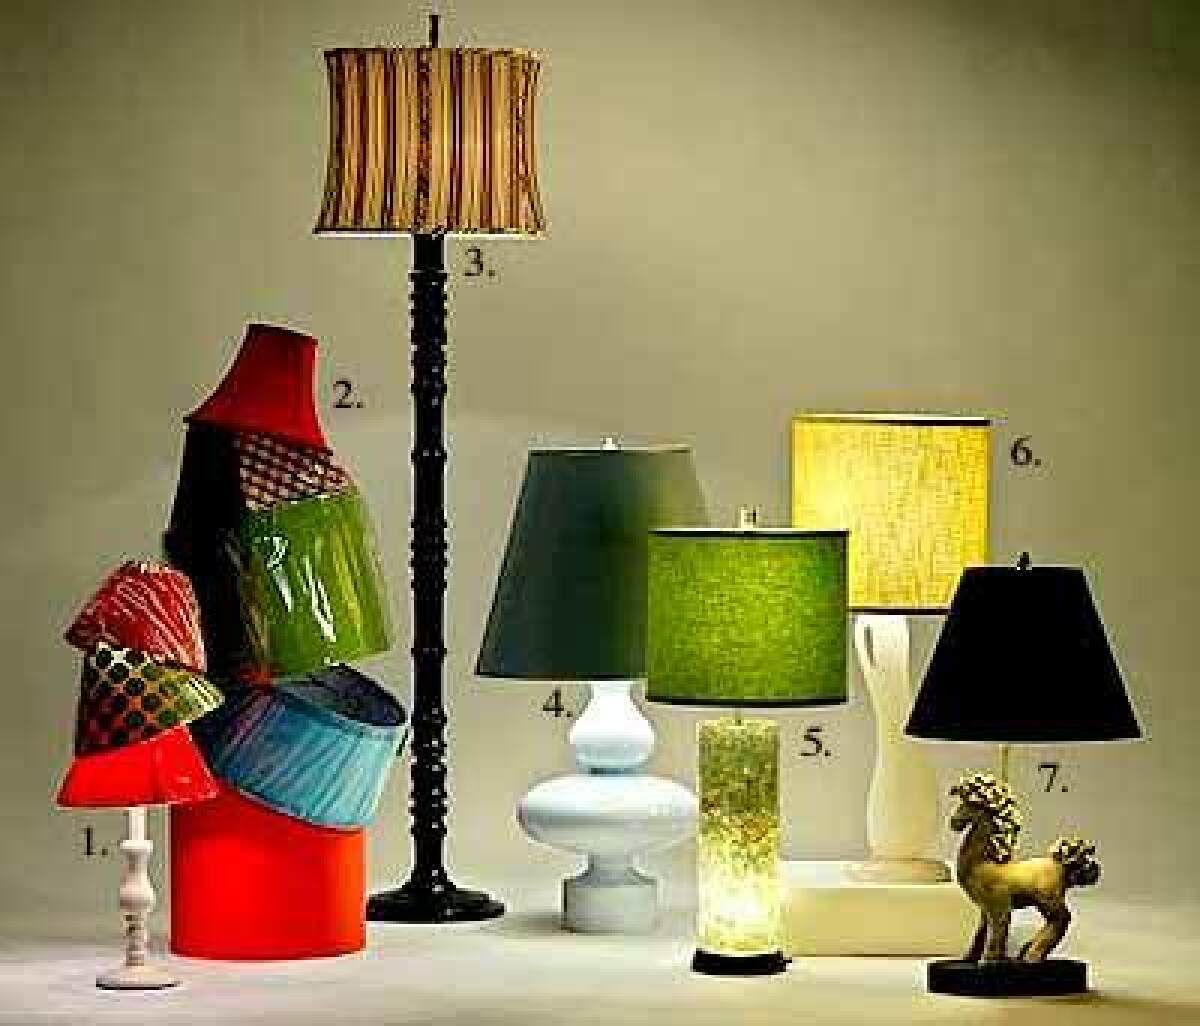 1. A lacquered wood lamp ($19.99), with a trio of paper shades, from Target. 2. Linen shades in orange ($66), turquoise with trim ($55), lime ($77.75), red plaid ($45) and red ($85), from Fantasy Lighting, Los Angeles, (323) 933-7244. 3. Antique bronze floor lamp with striped, dupioni silk shade ($775), from Zipper, Los Angeles, (323) 951-0620. 4. Bel-Air ceramic lamp in baby blue with paper shade ($795), from Jonathan Adler, Los Angeles, (323) 658-8390. 5. Freda Koblicks lamp with illuminated resin base and lime green shade ($1,250); 6. amorphous alabaster vase lamp with yellow shade ($1,800); 7. Austrian ceramic horse lamp with gold foil-lined black shade ($1,500 per pair), Modern One, Los Angeles, (323) 651-5082.